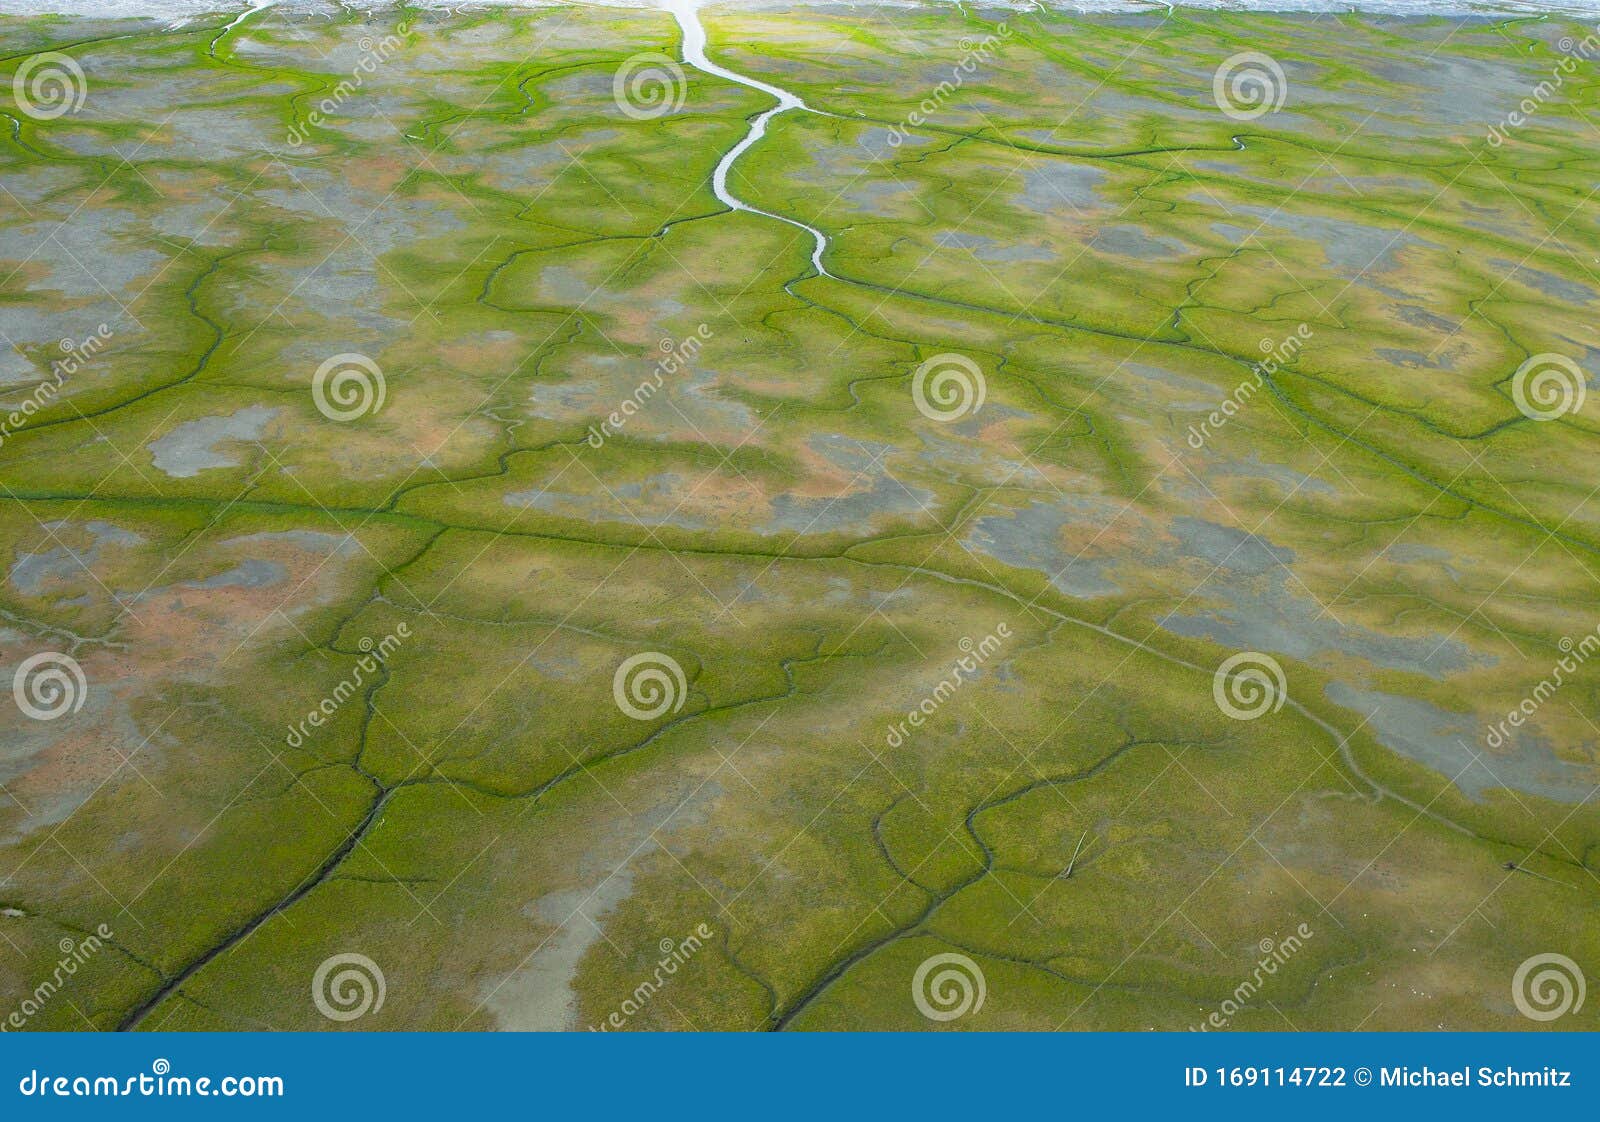 rivers and inlets cut through the green barren tundra in alaska.